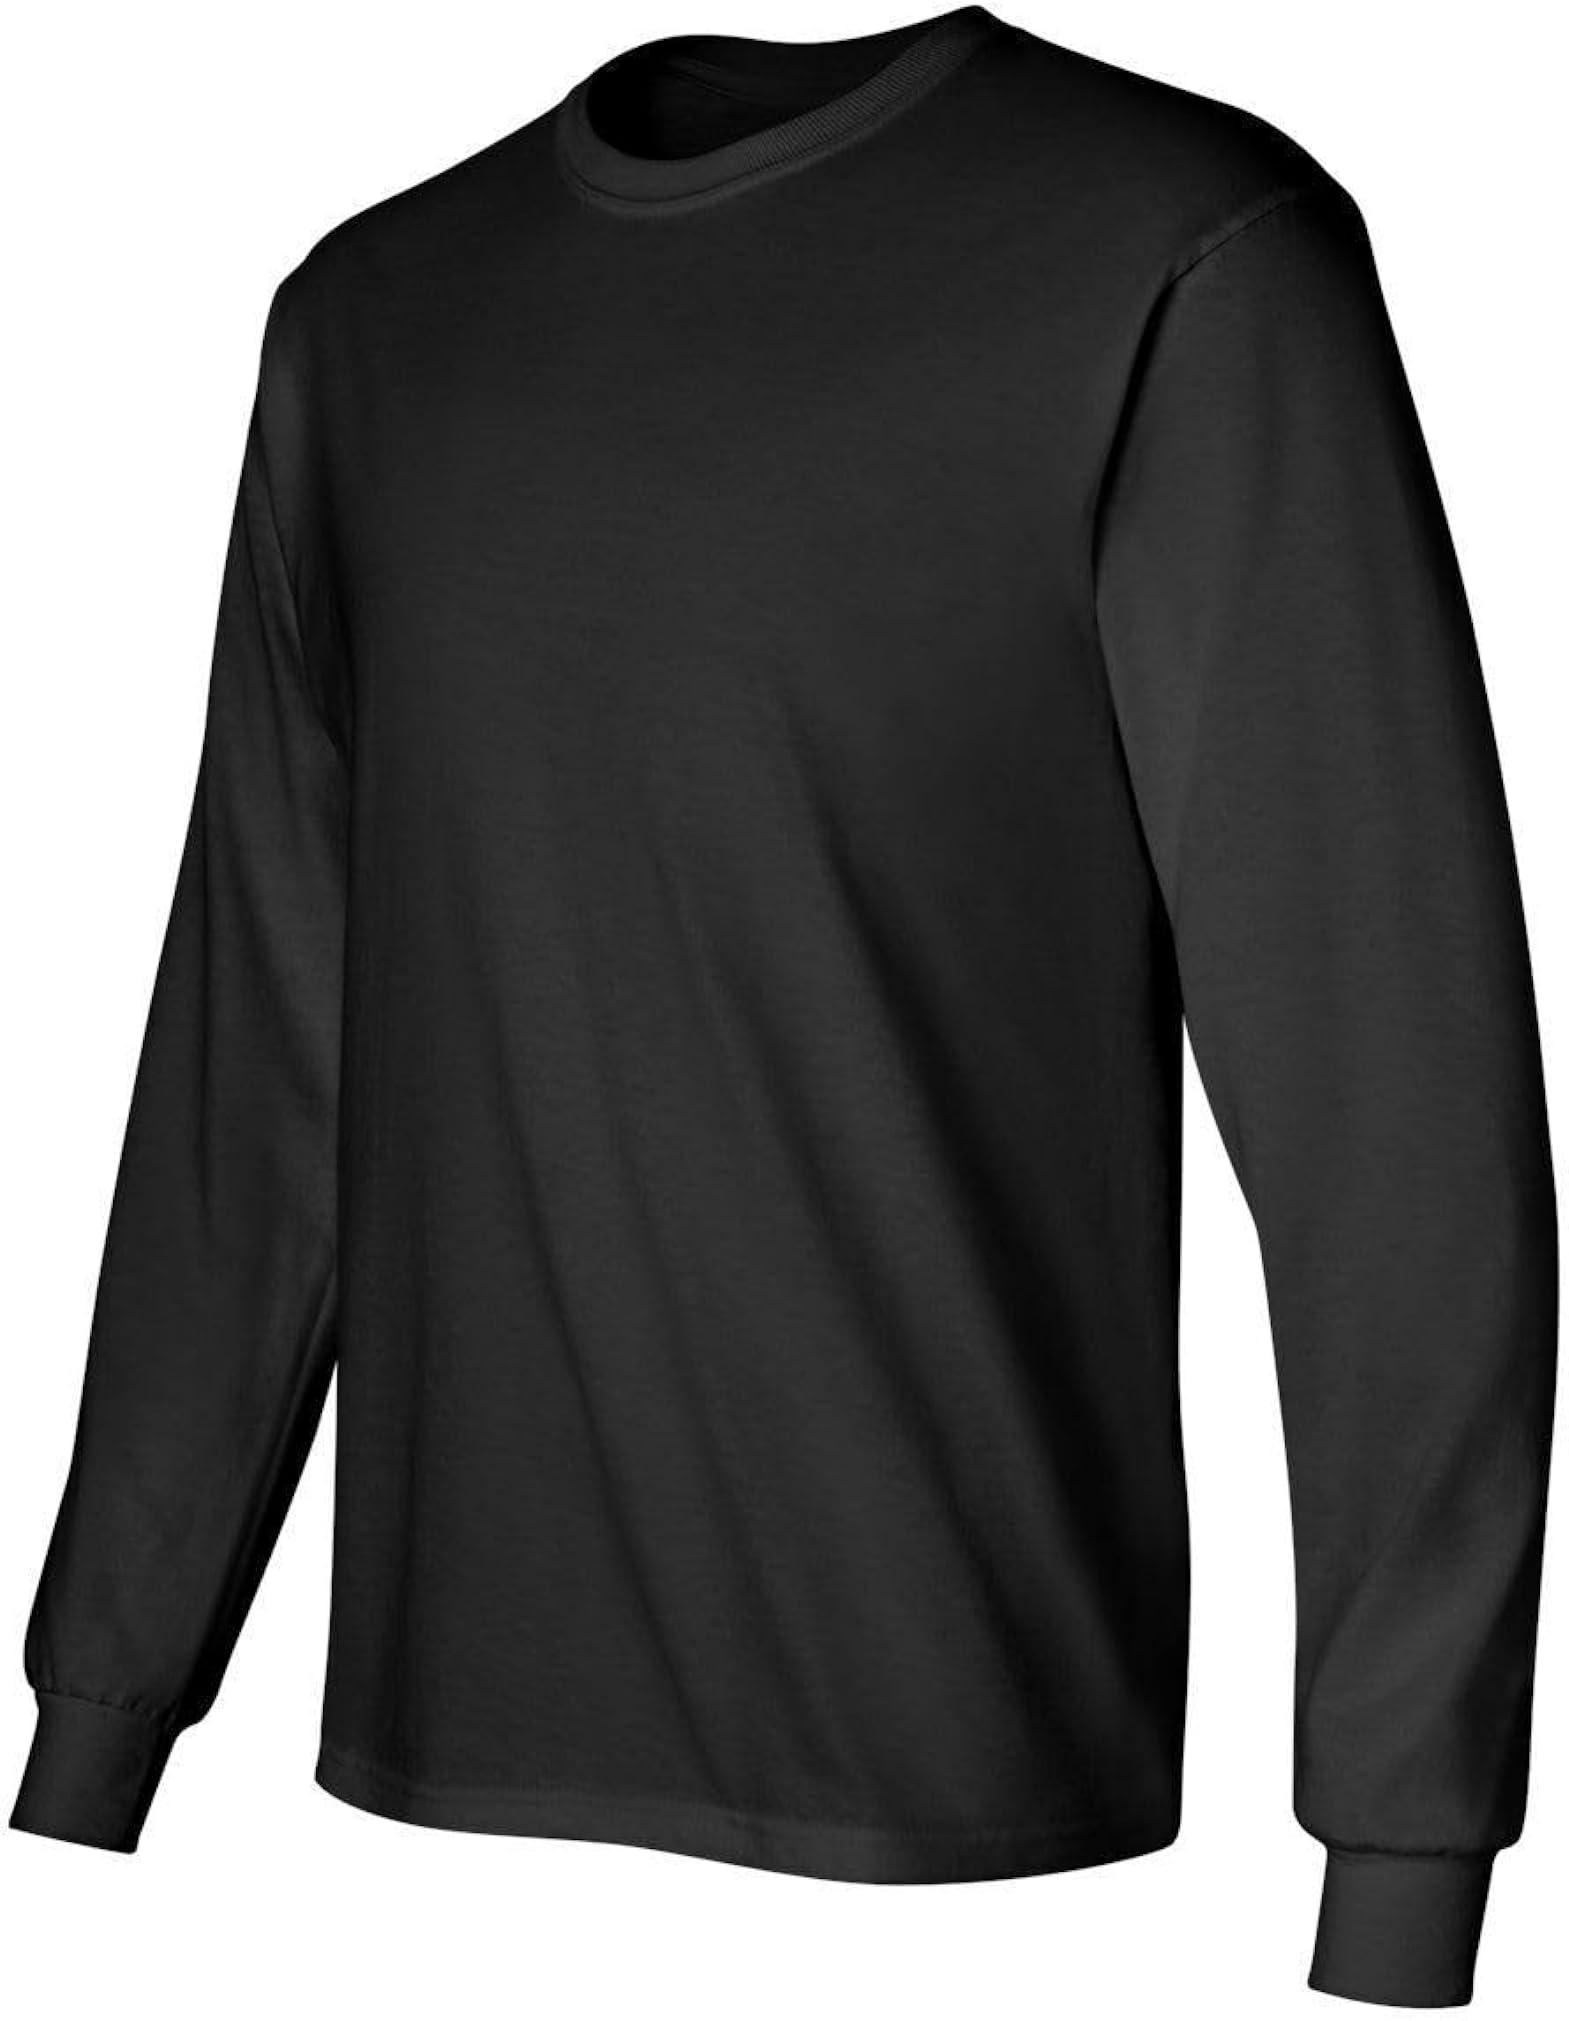 BILLIONHATS 6 Pack Big & Tall Long Sleeve Colorful T-Shirts for Mens 100% Cotton - Crew Neck Bulk Tees Wholesale Packs